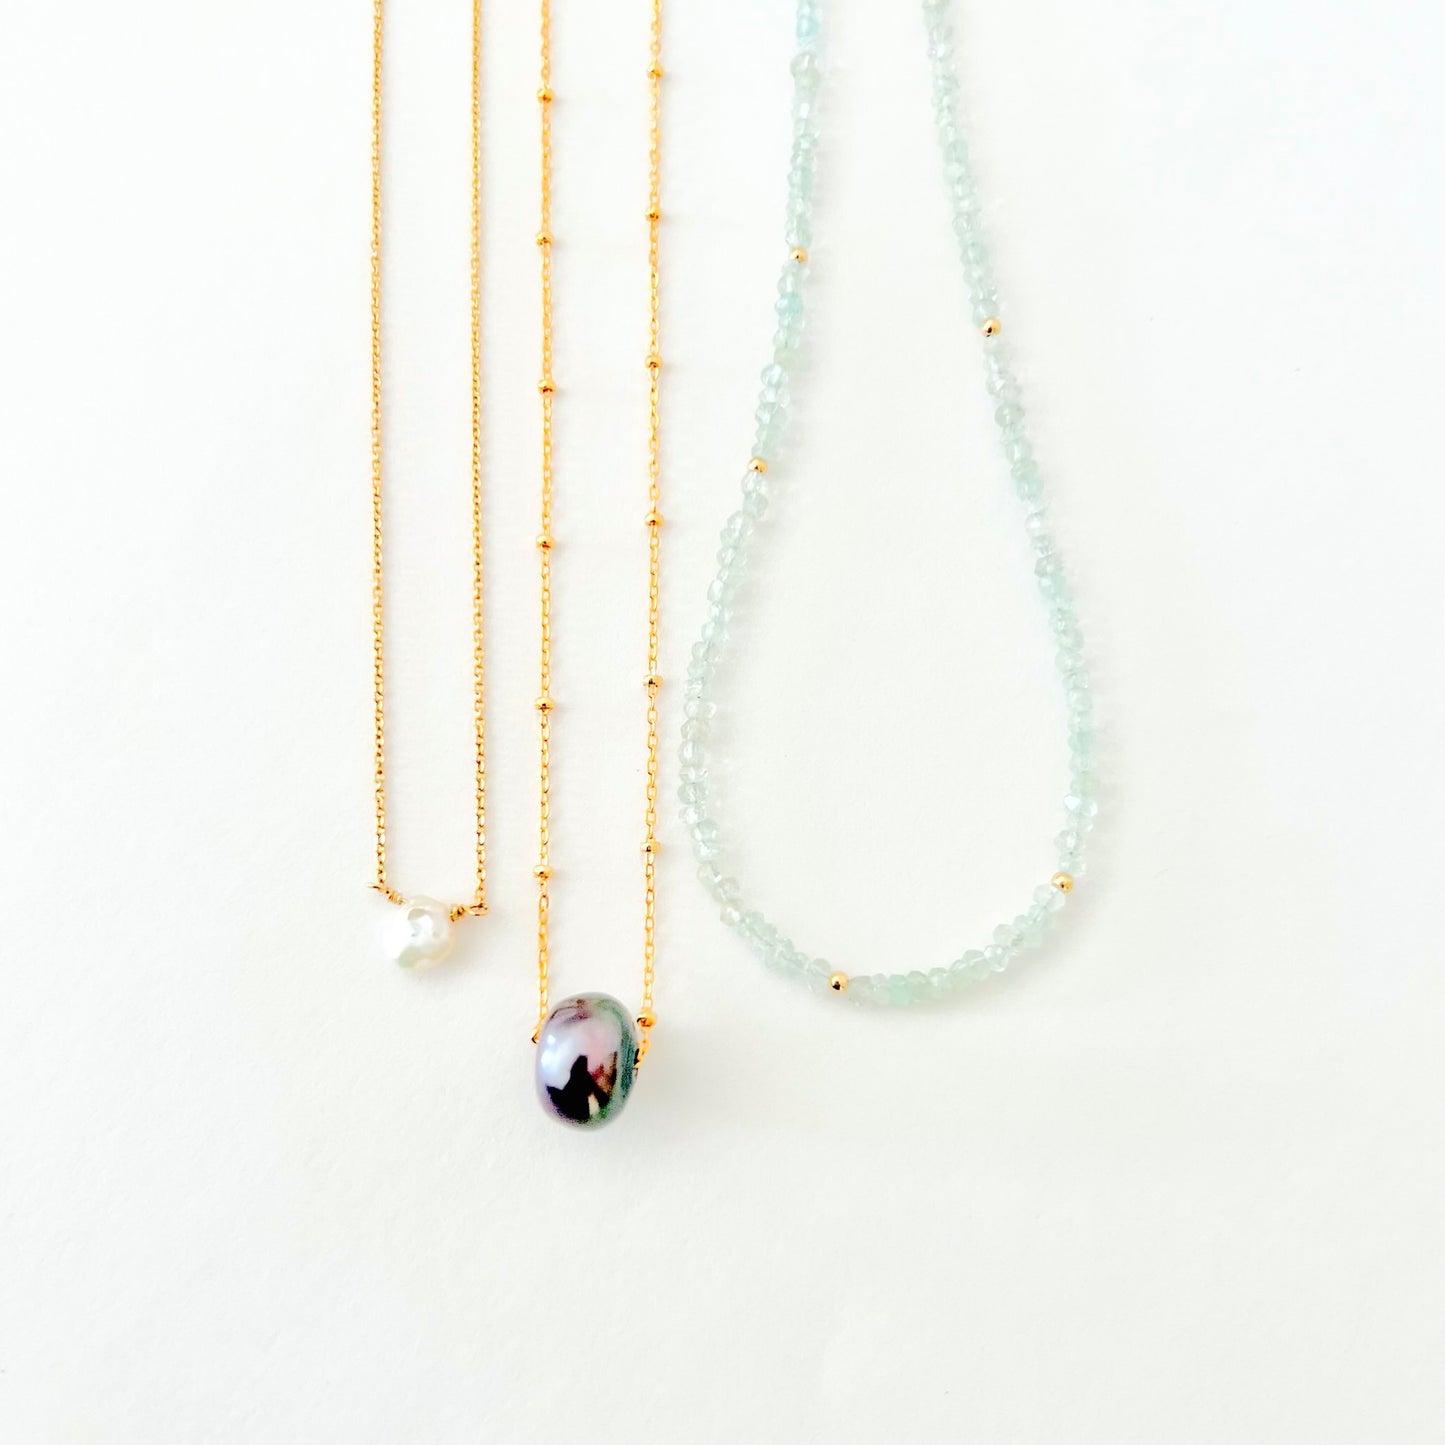 Leigh peacock sliding pearl necklace